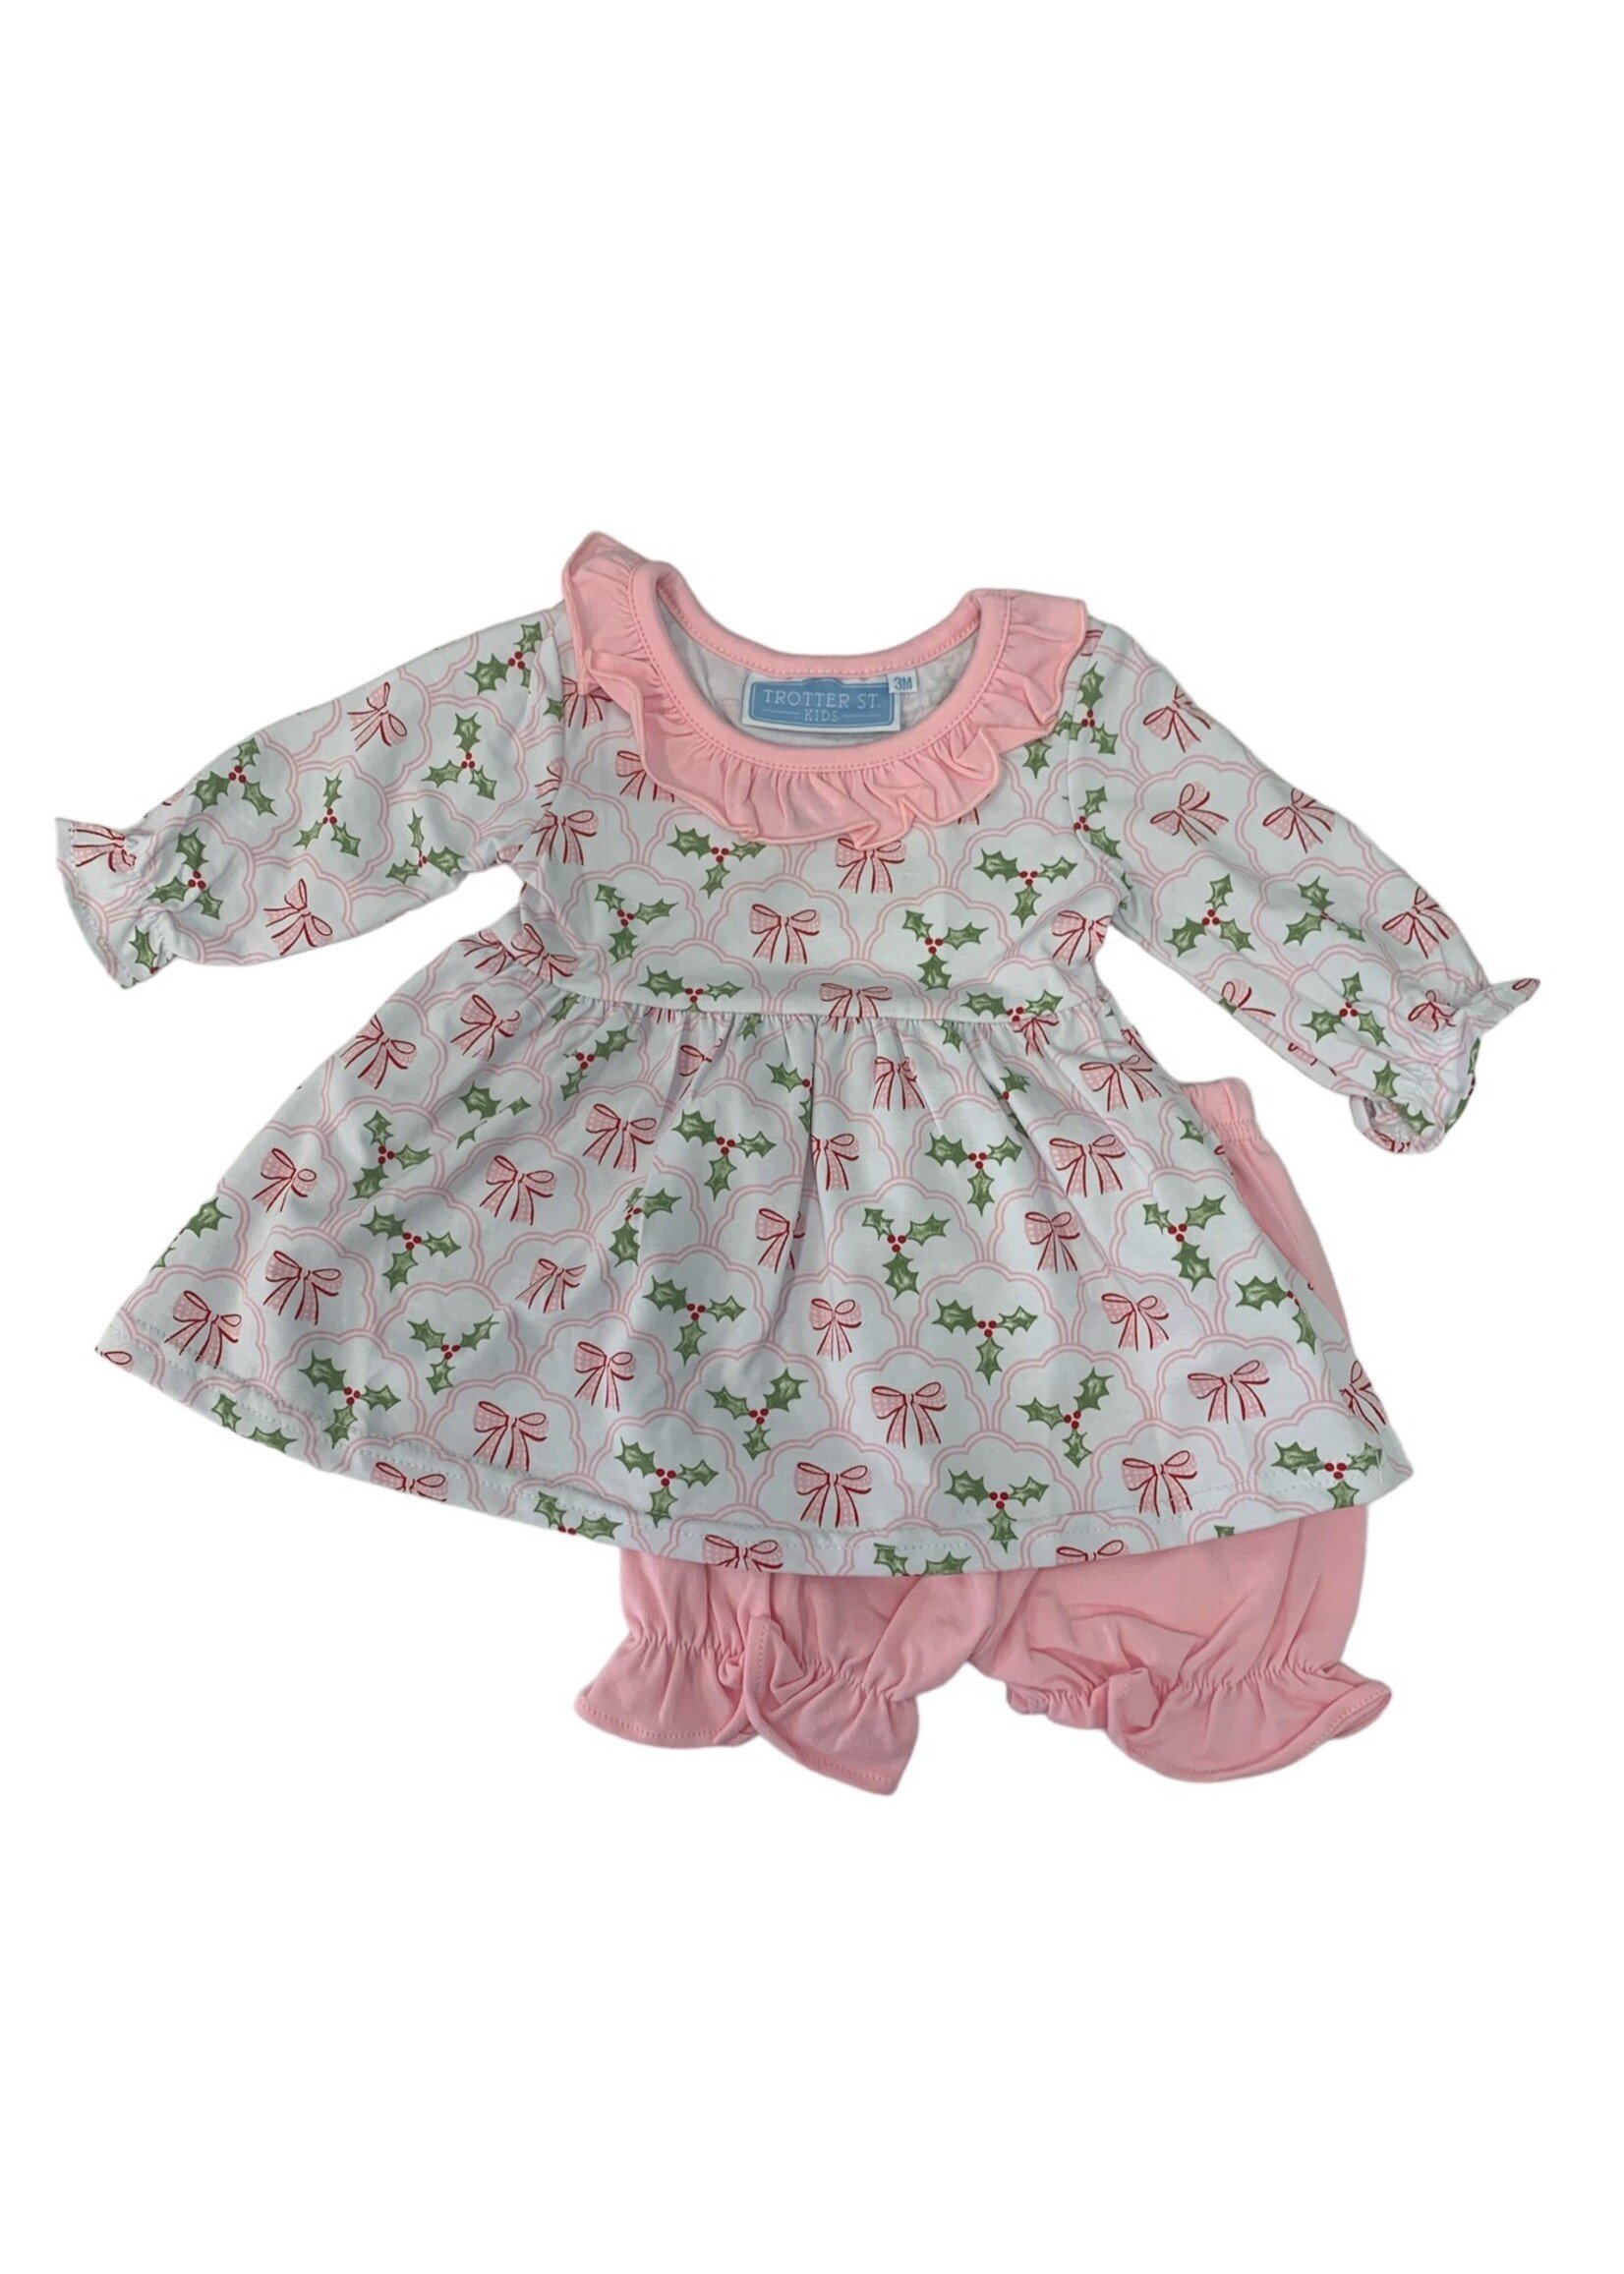 Trotter Street Berries and Bows Bloomer Set